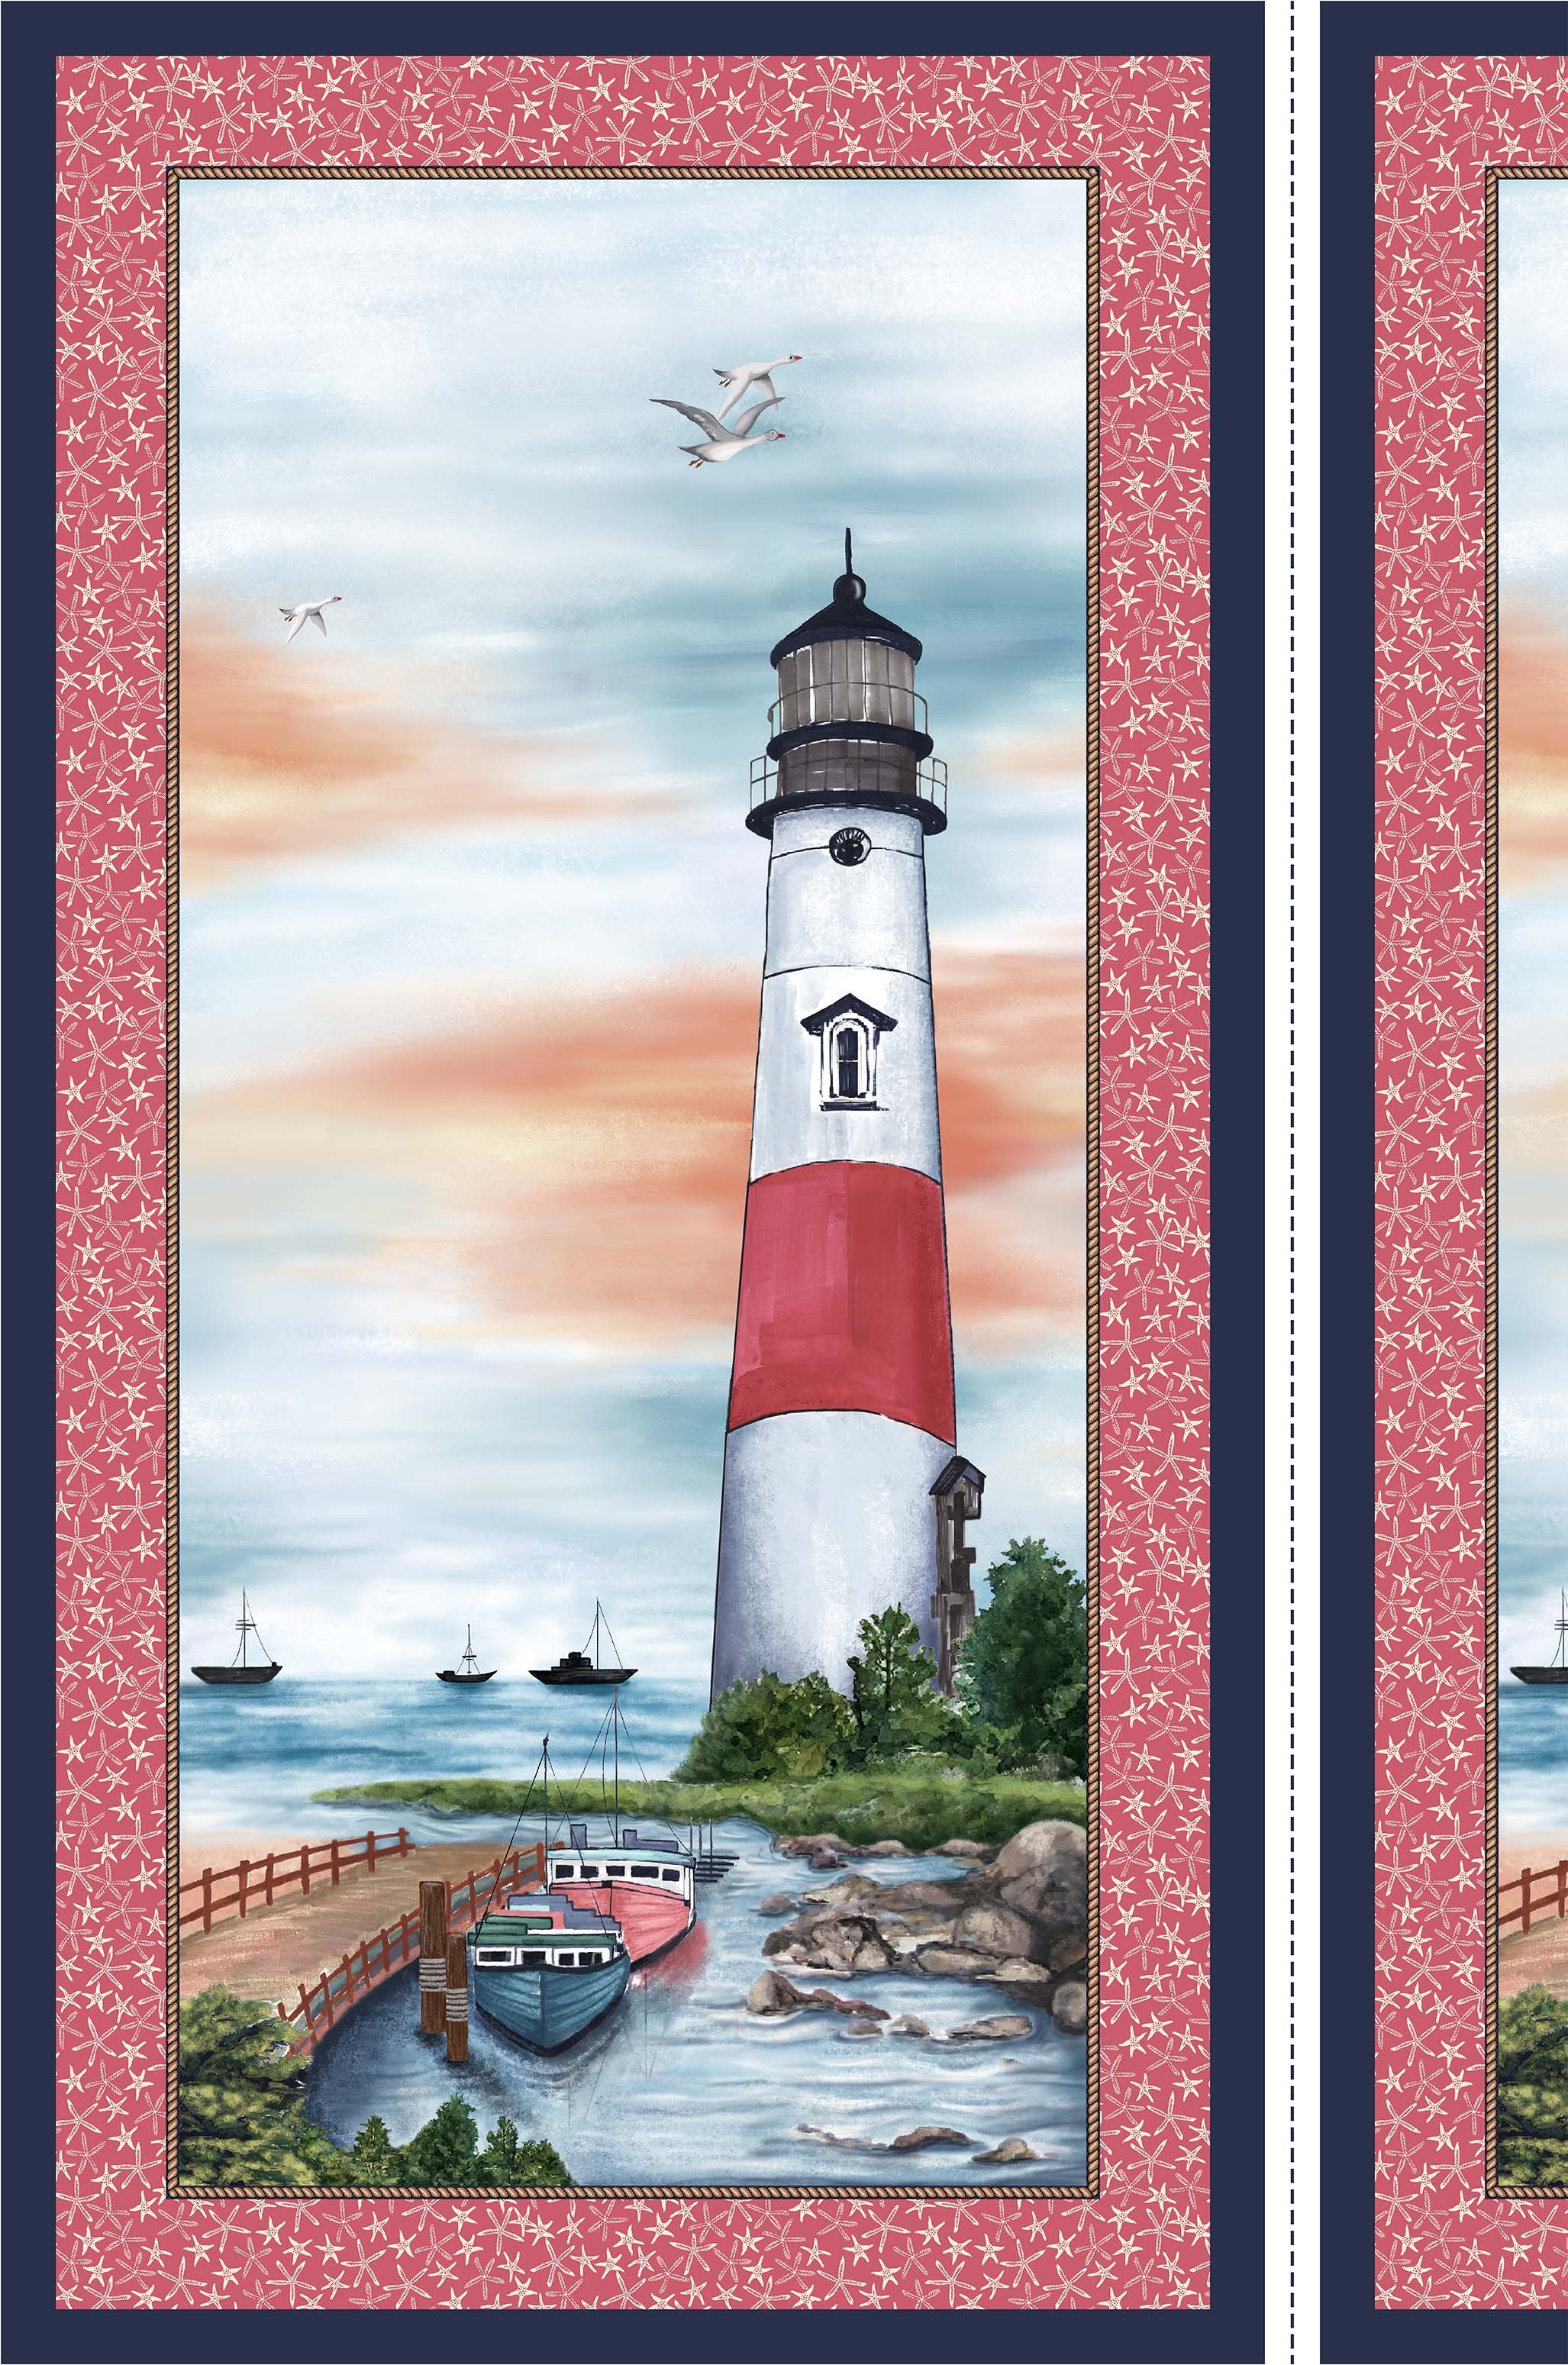 HD Holy Lighthouse Backdrops Sacred Light Guided Fishing Boat s Seaside Lighthouse Photography Backdrops Photo Studio Background Props Family Interior Mural 5x7ft LSMT269 